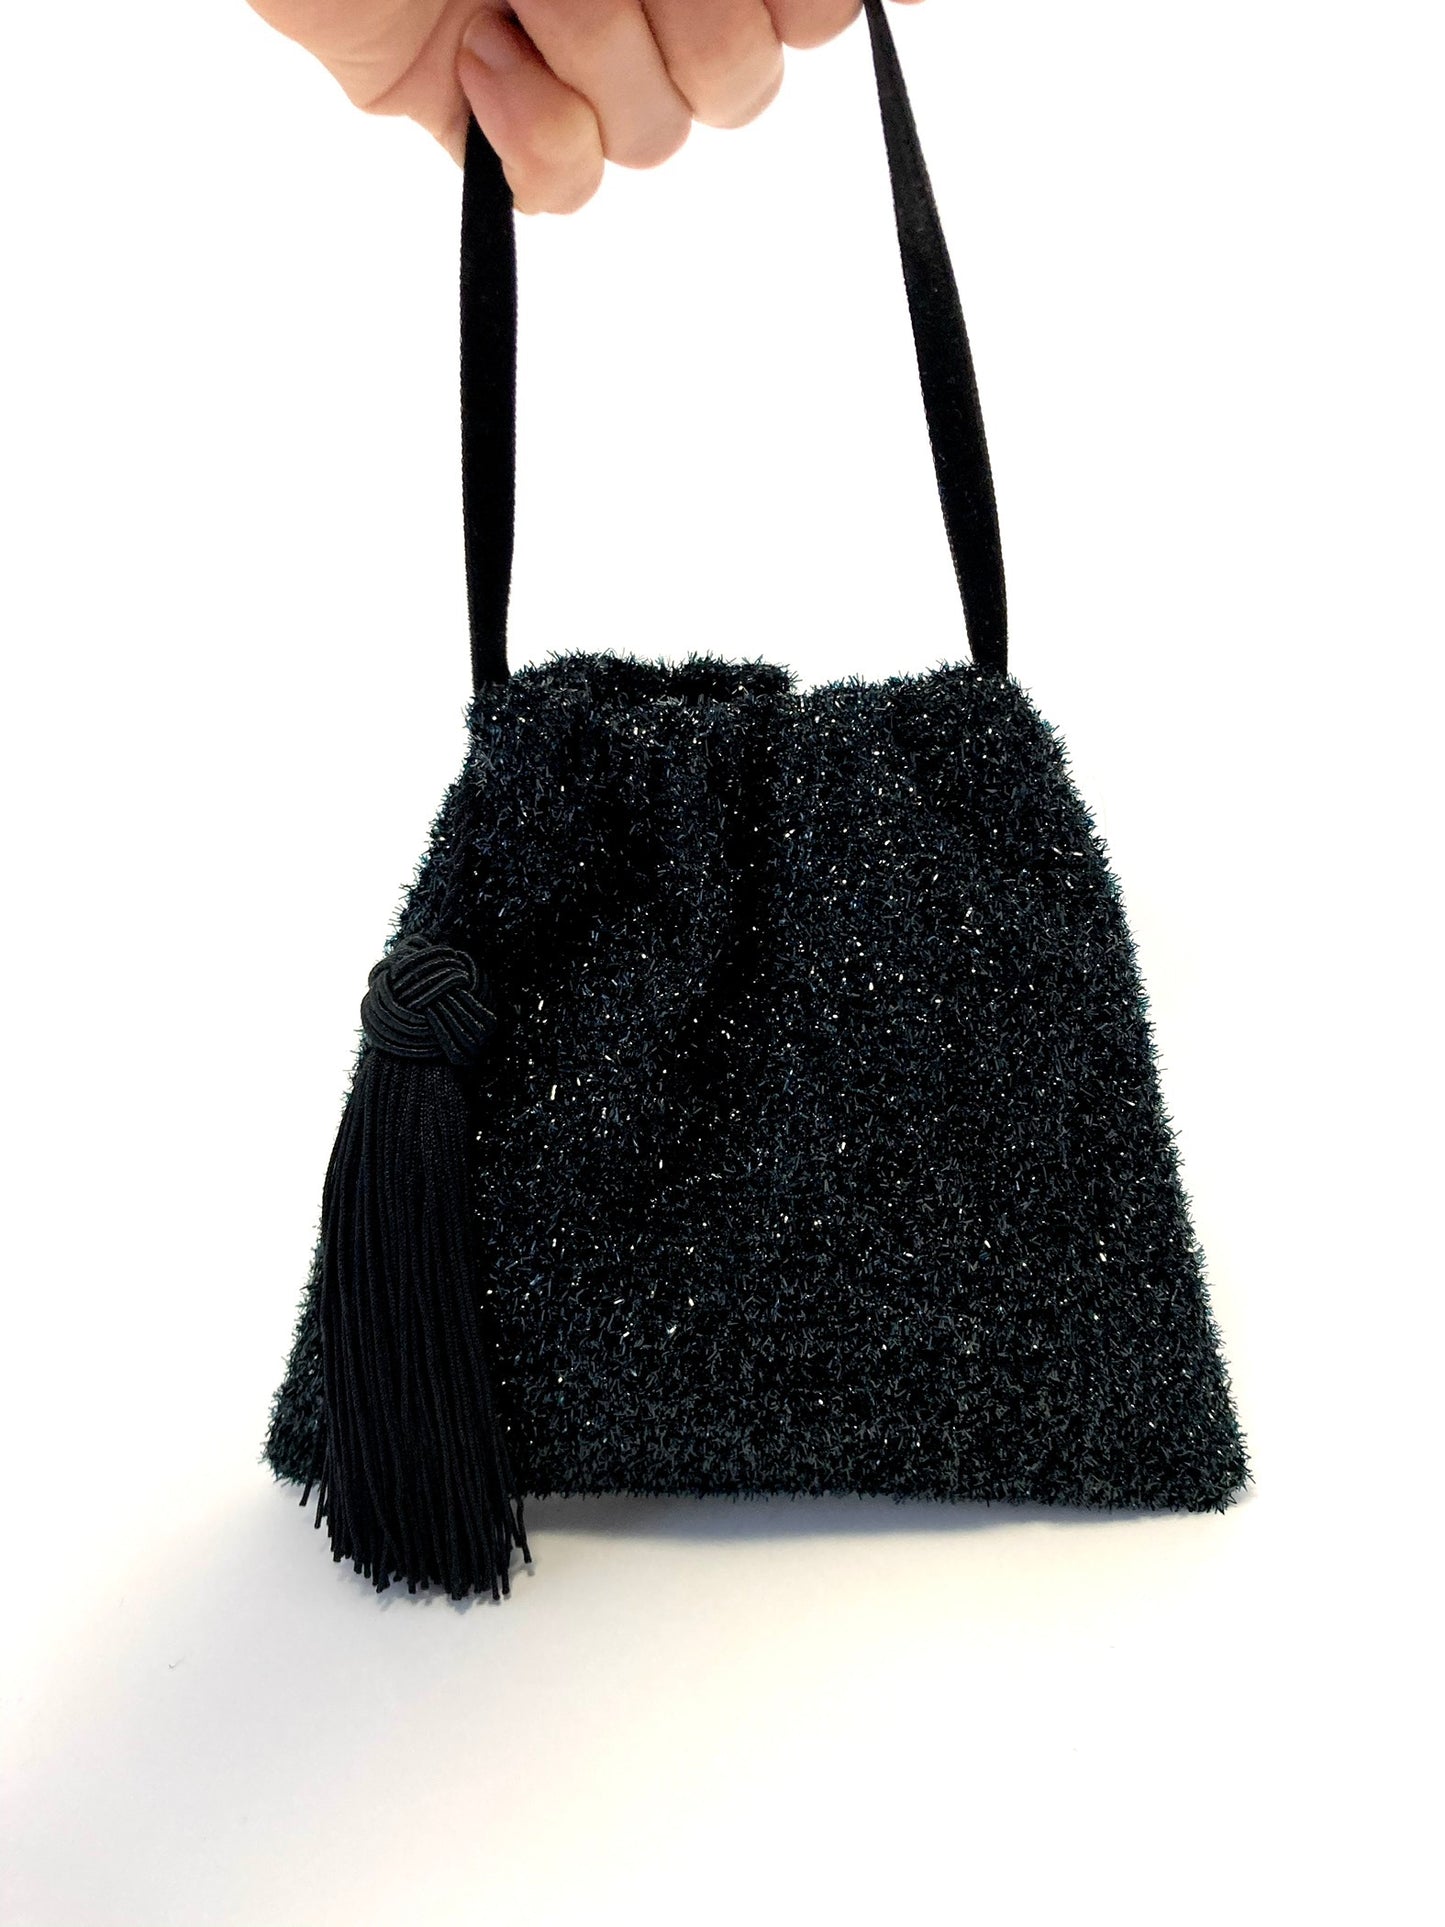 Little black handbag – There Is No More!